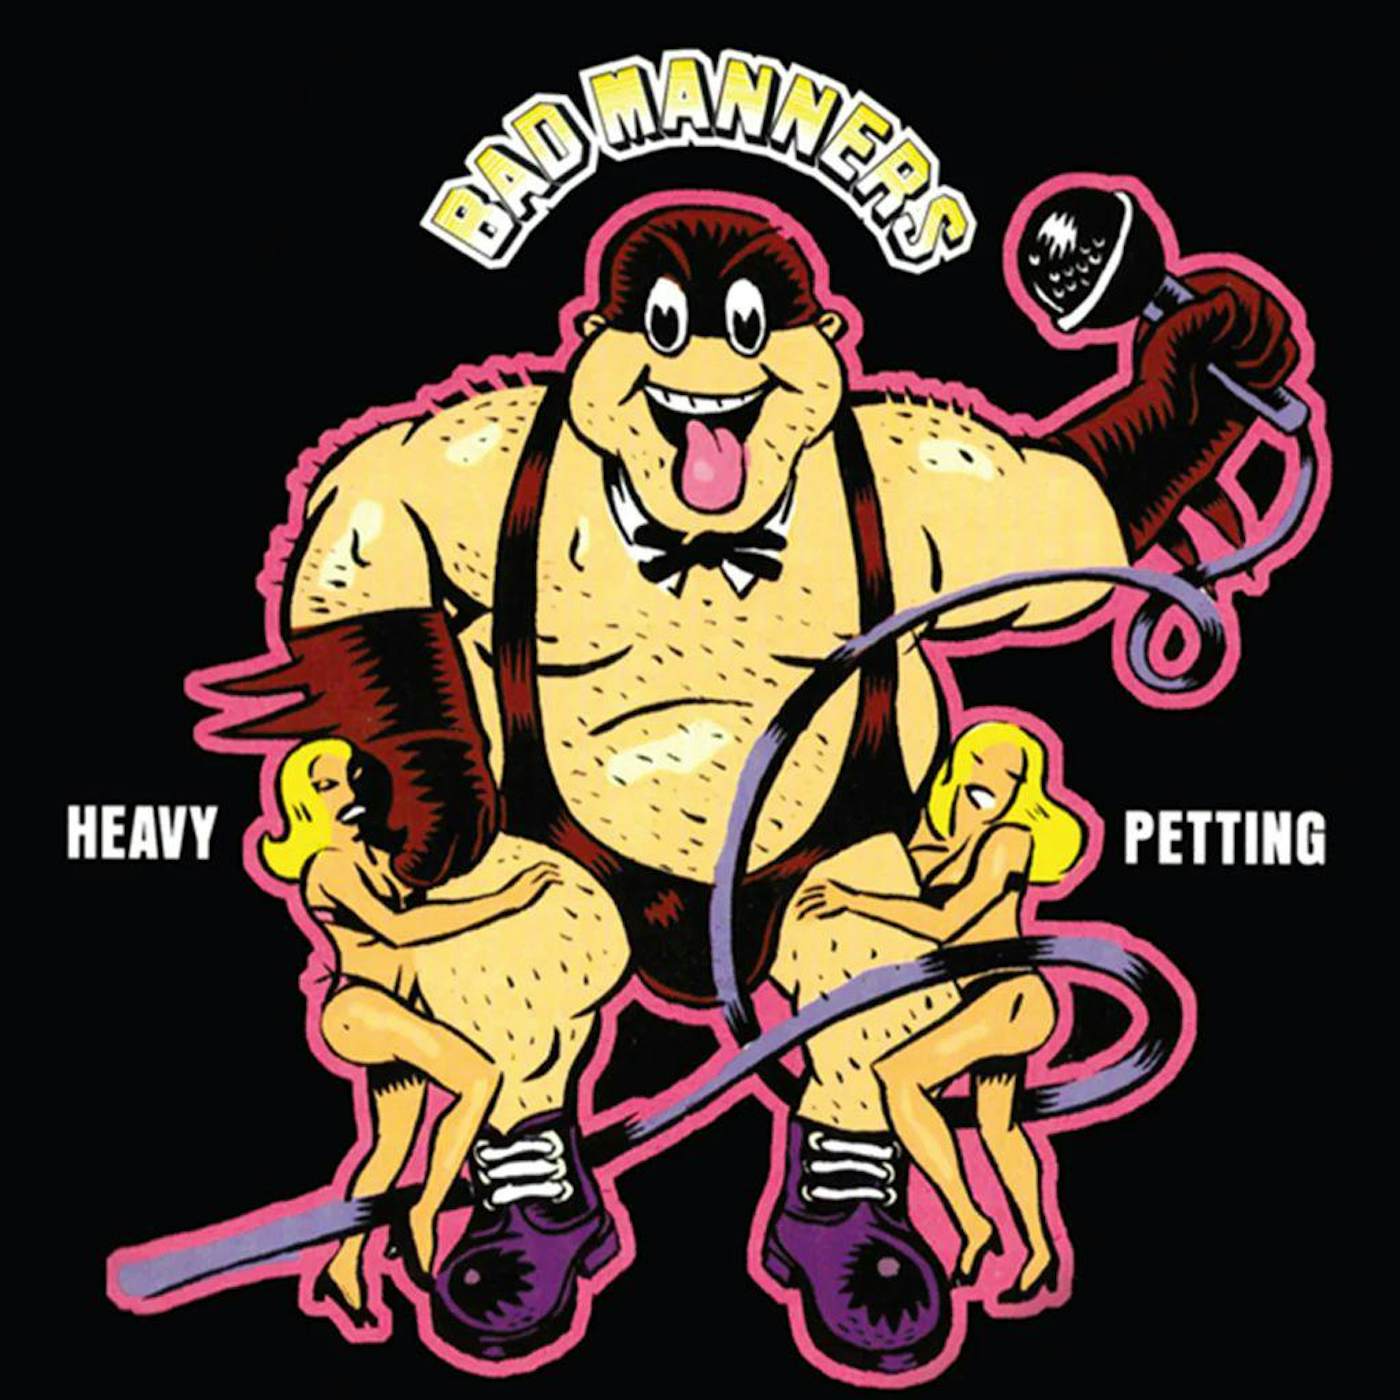 Bad Manners Heavy Petting (White) Vinyl Record